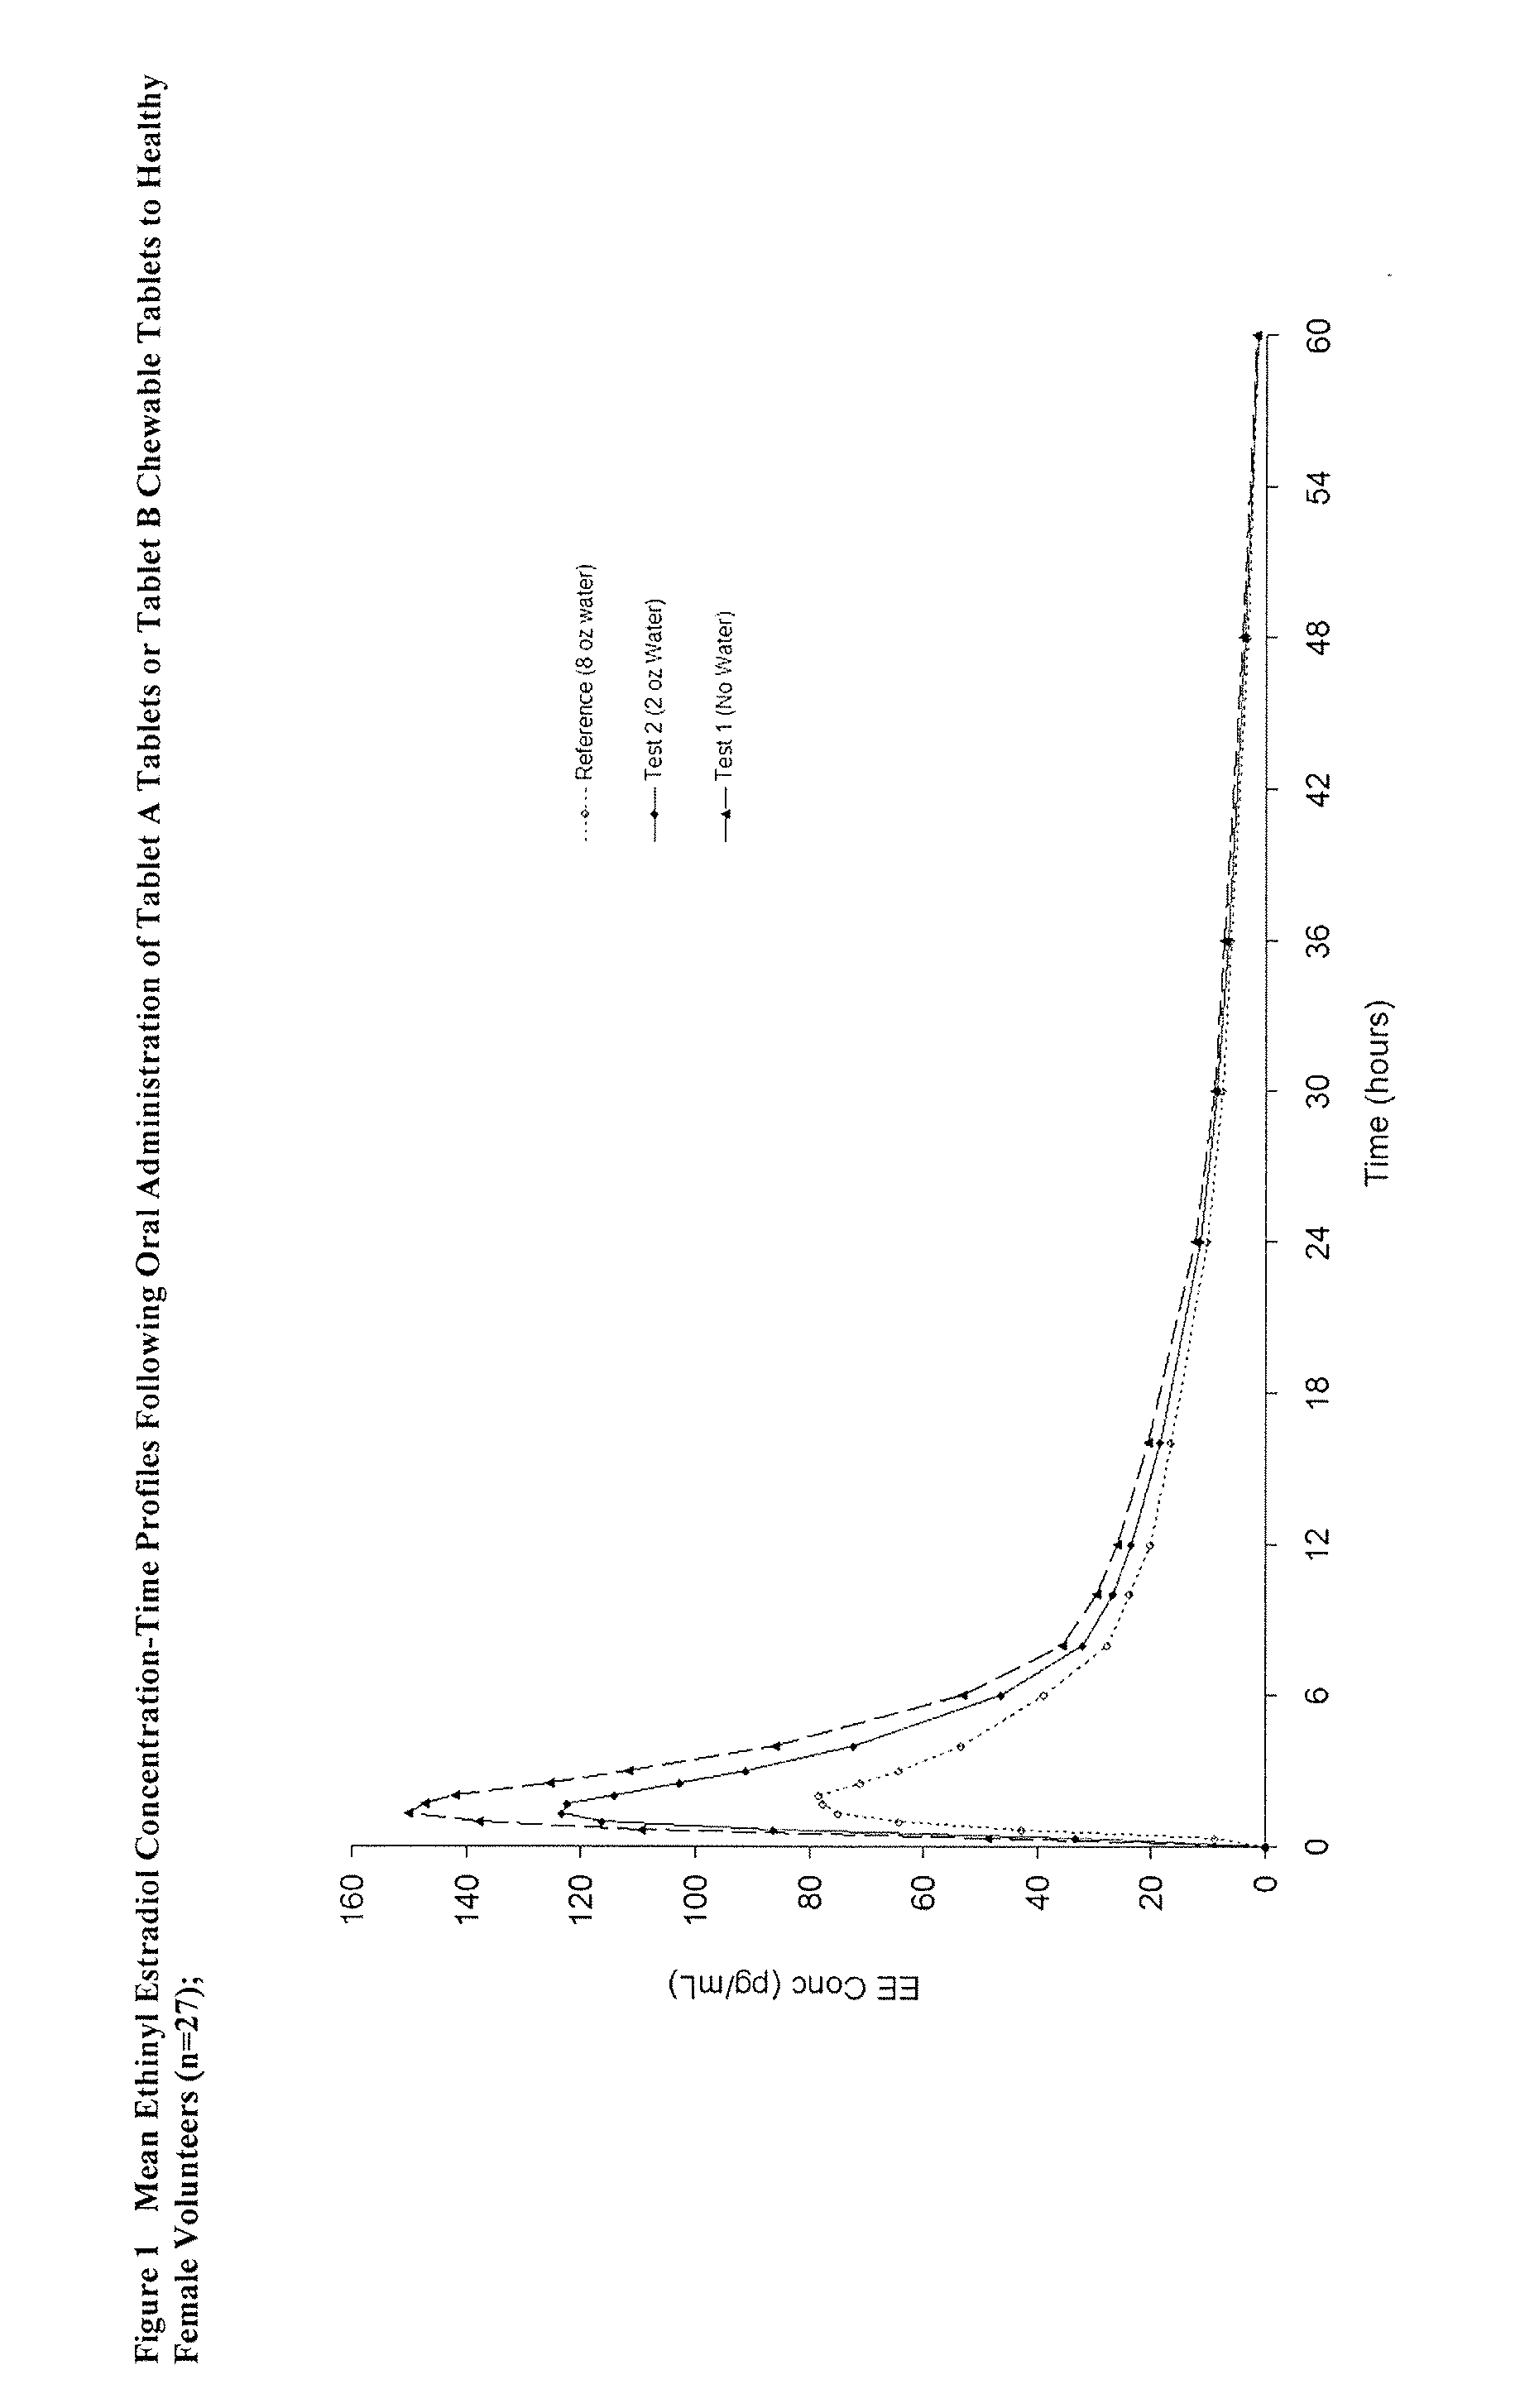 Methods to administer solid dosage forms of ethinyl estradiol and prodrugs thereof with improved bioavailability